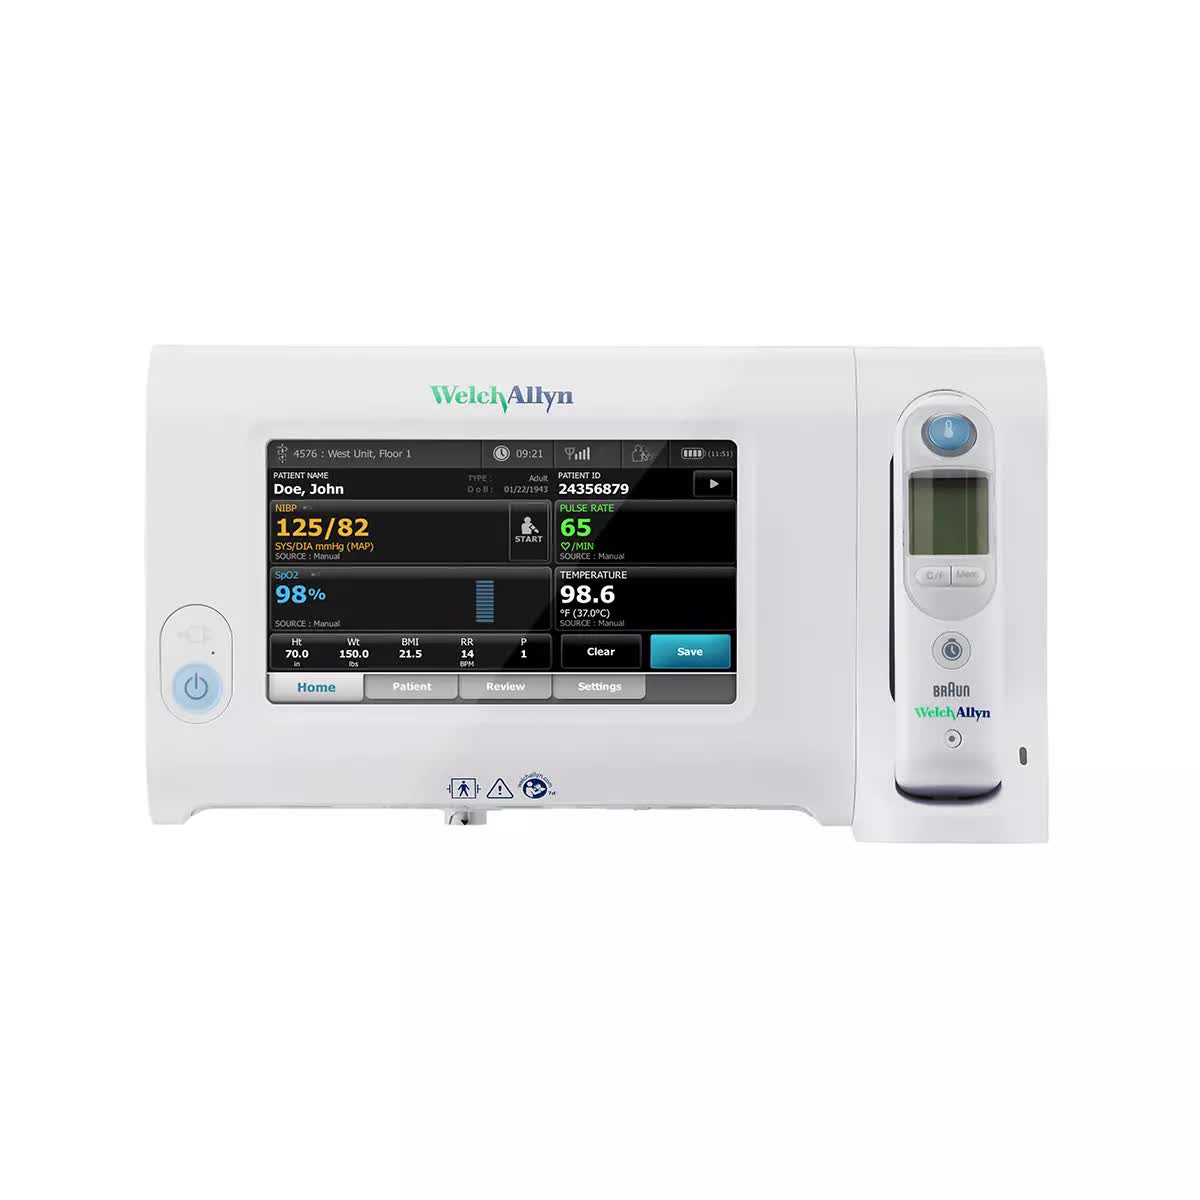 Welch Allyn Connex 7500 WIFI Connectivity Spot Monitor with Nellcor SpO2 and Braun Pro6000